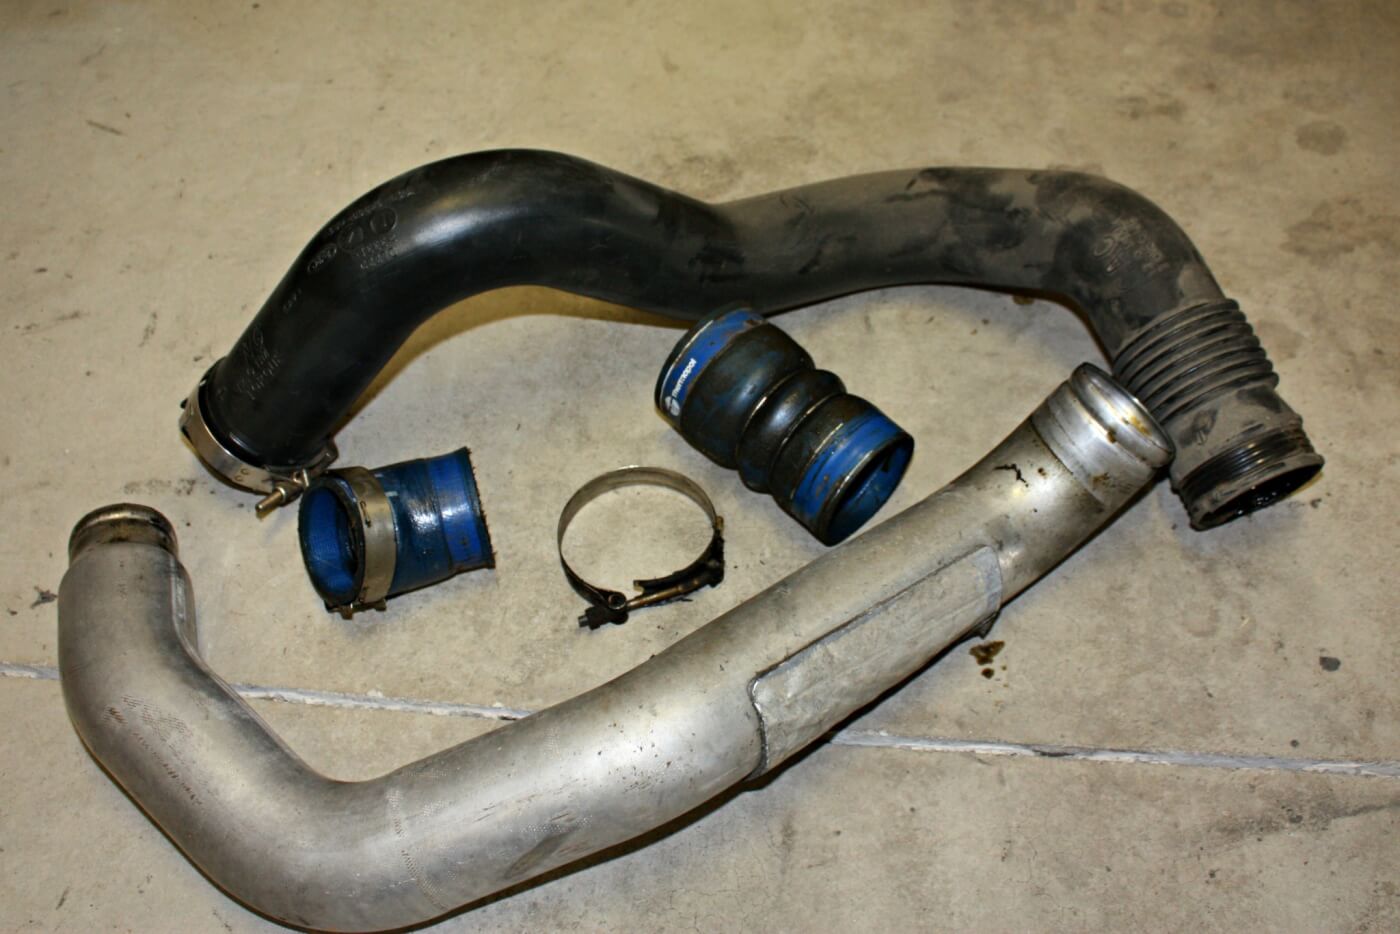 8. Note the stock intercooler pipes while serving their purpose of getting charged air from the turbocharger outlet to the engines intake manifold. The poorly designed and crimped piping definitely won’t flow like the Banks system does. The factory oil saturated intercooler boots will also be replaced.